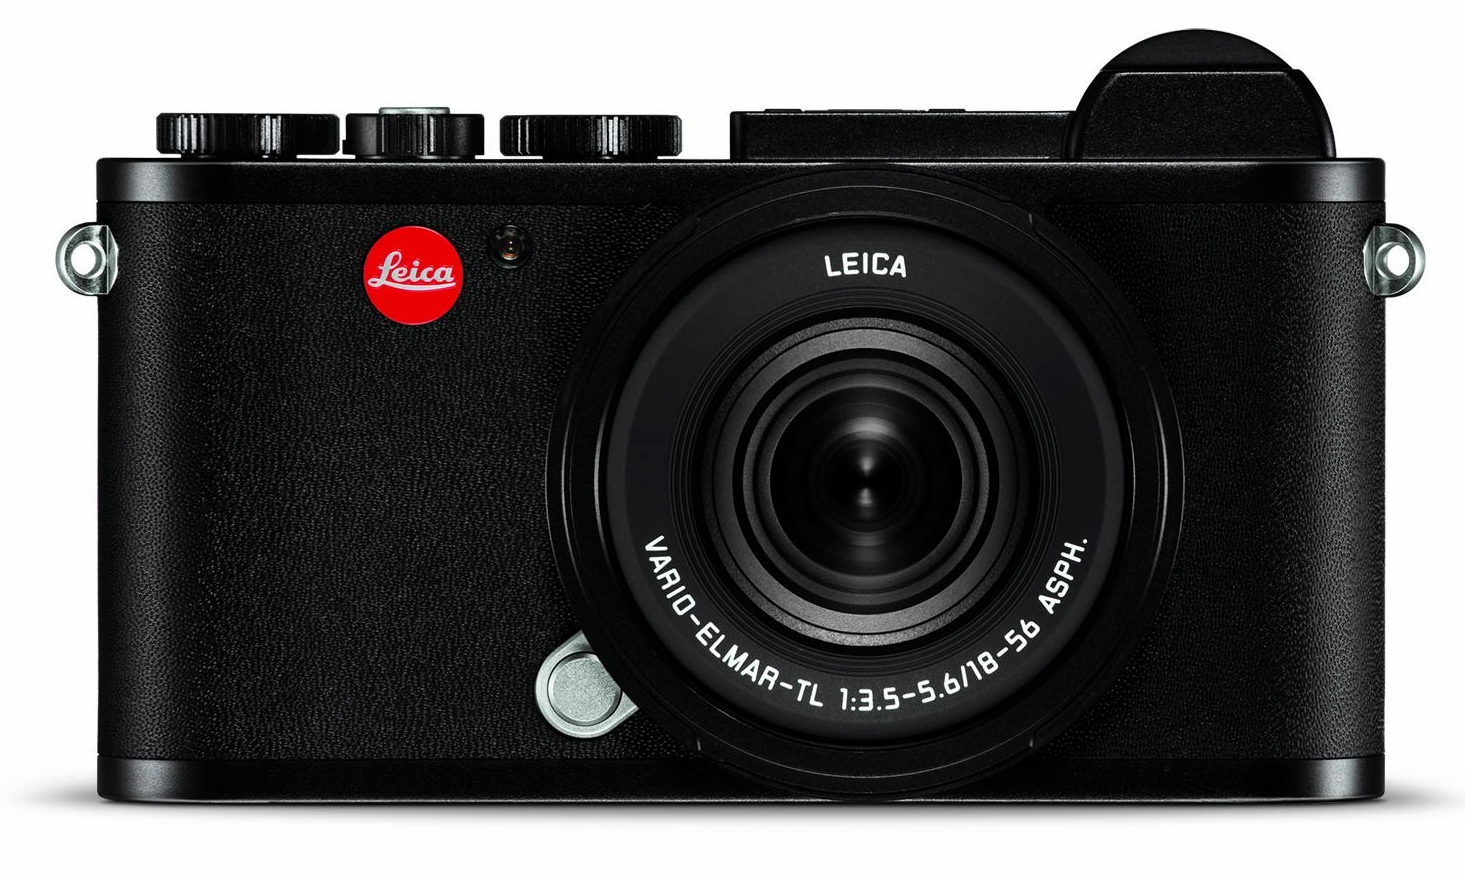 Leica Vario-Elmar-T 18-56mm f/3.5-5.6 ASPH Lens reviewed by Master Photographer Oz Yilmaz examines the specs, features and hands-on review of Leica TL lens.